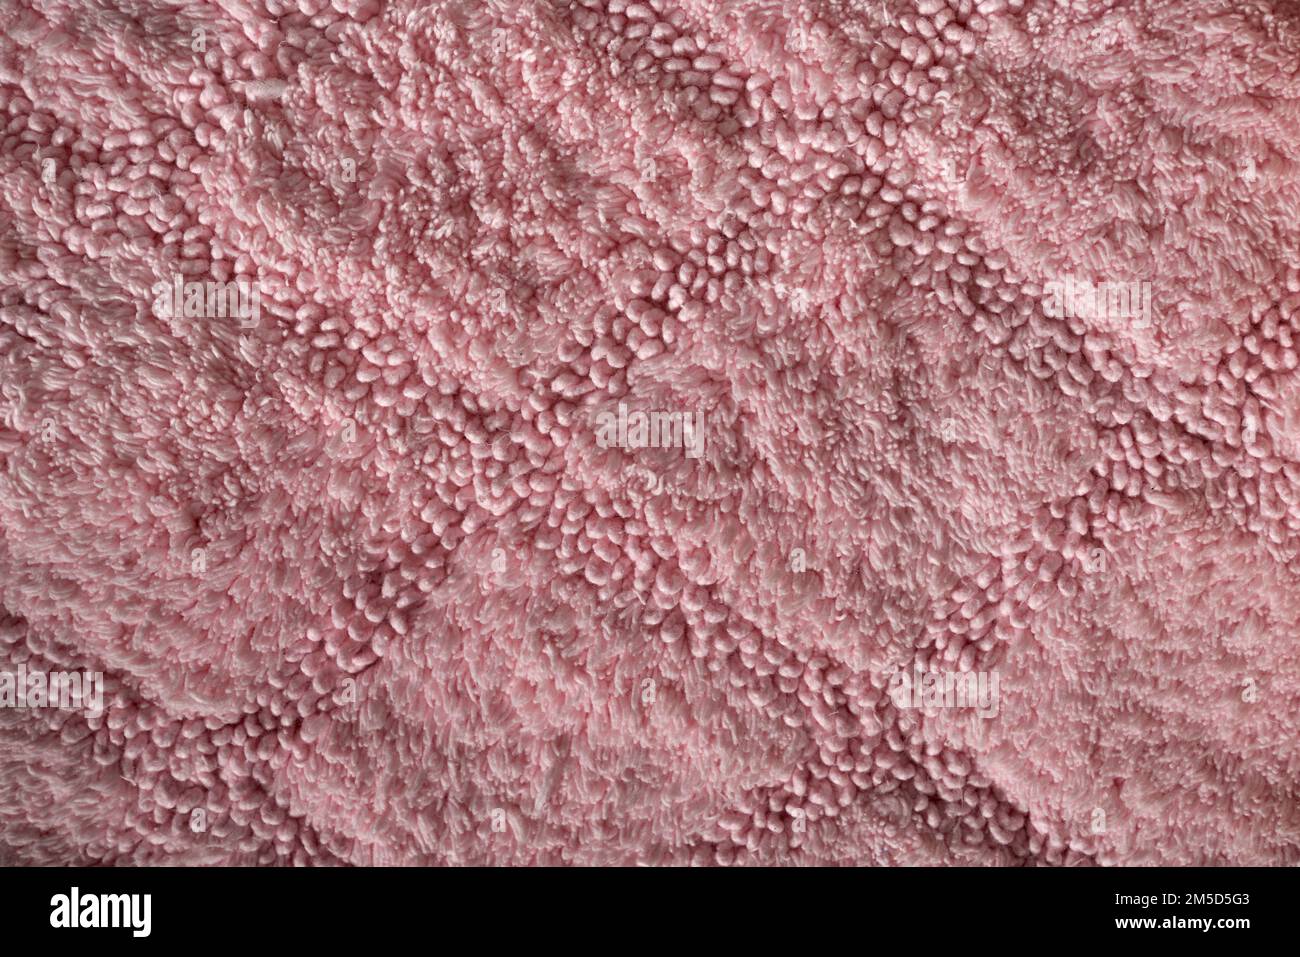 Fragment of decorative carpet fabric pattern, textured background. Close up of pink short pile carpet, with geometric barely noticeable rhombus ornament. Concept of backgrounds and textures. Stock Photo